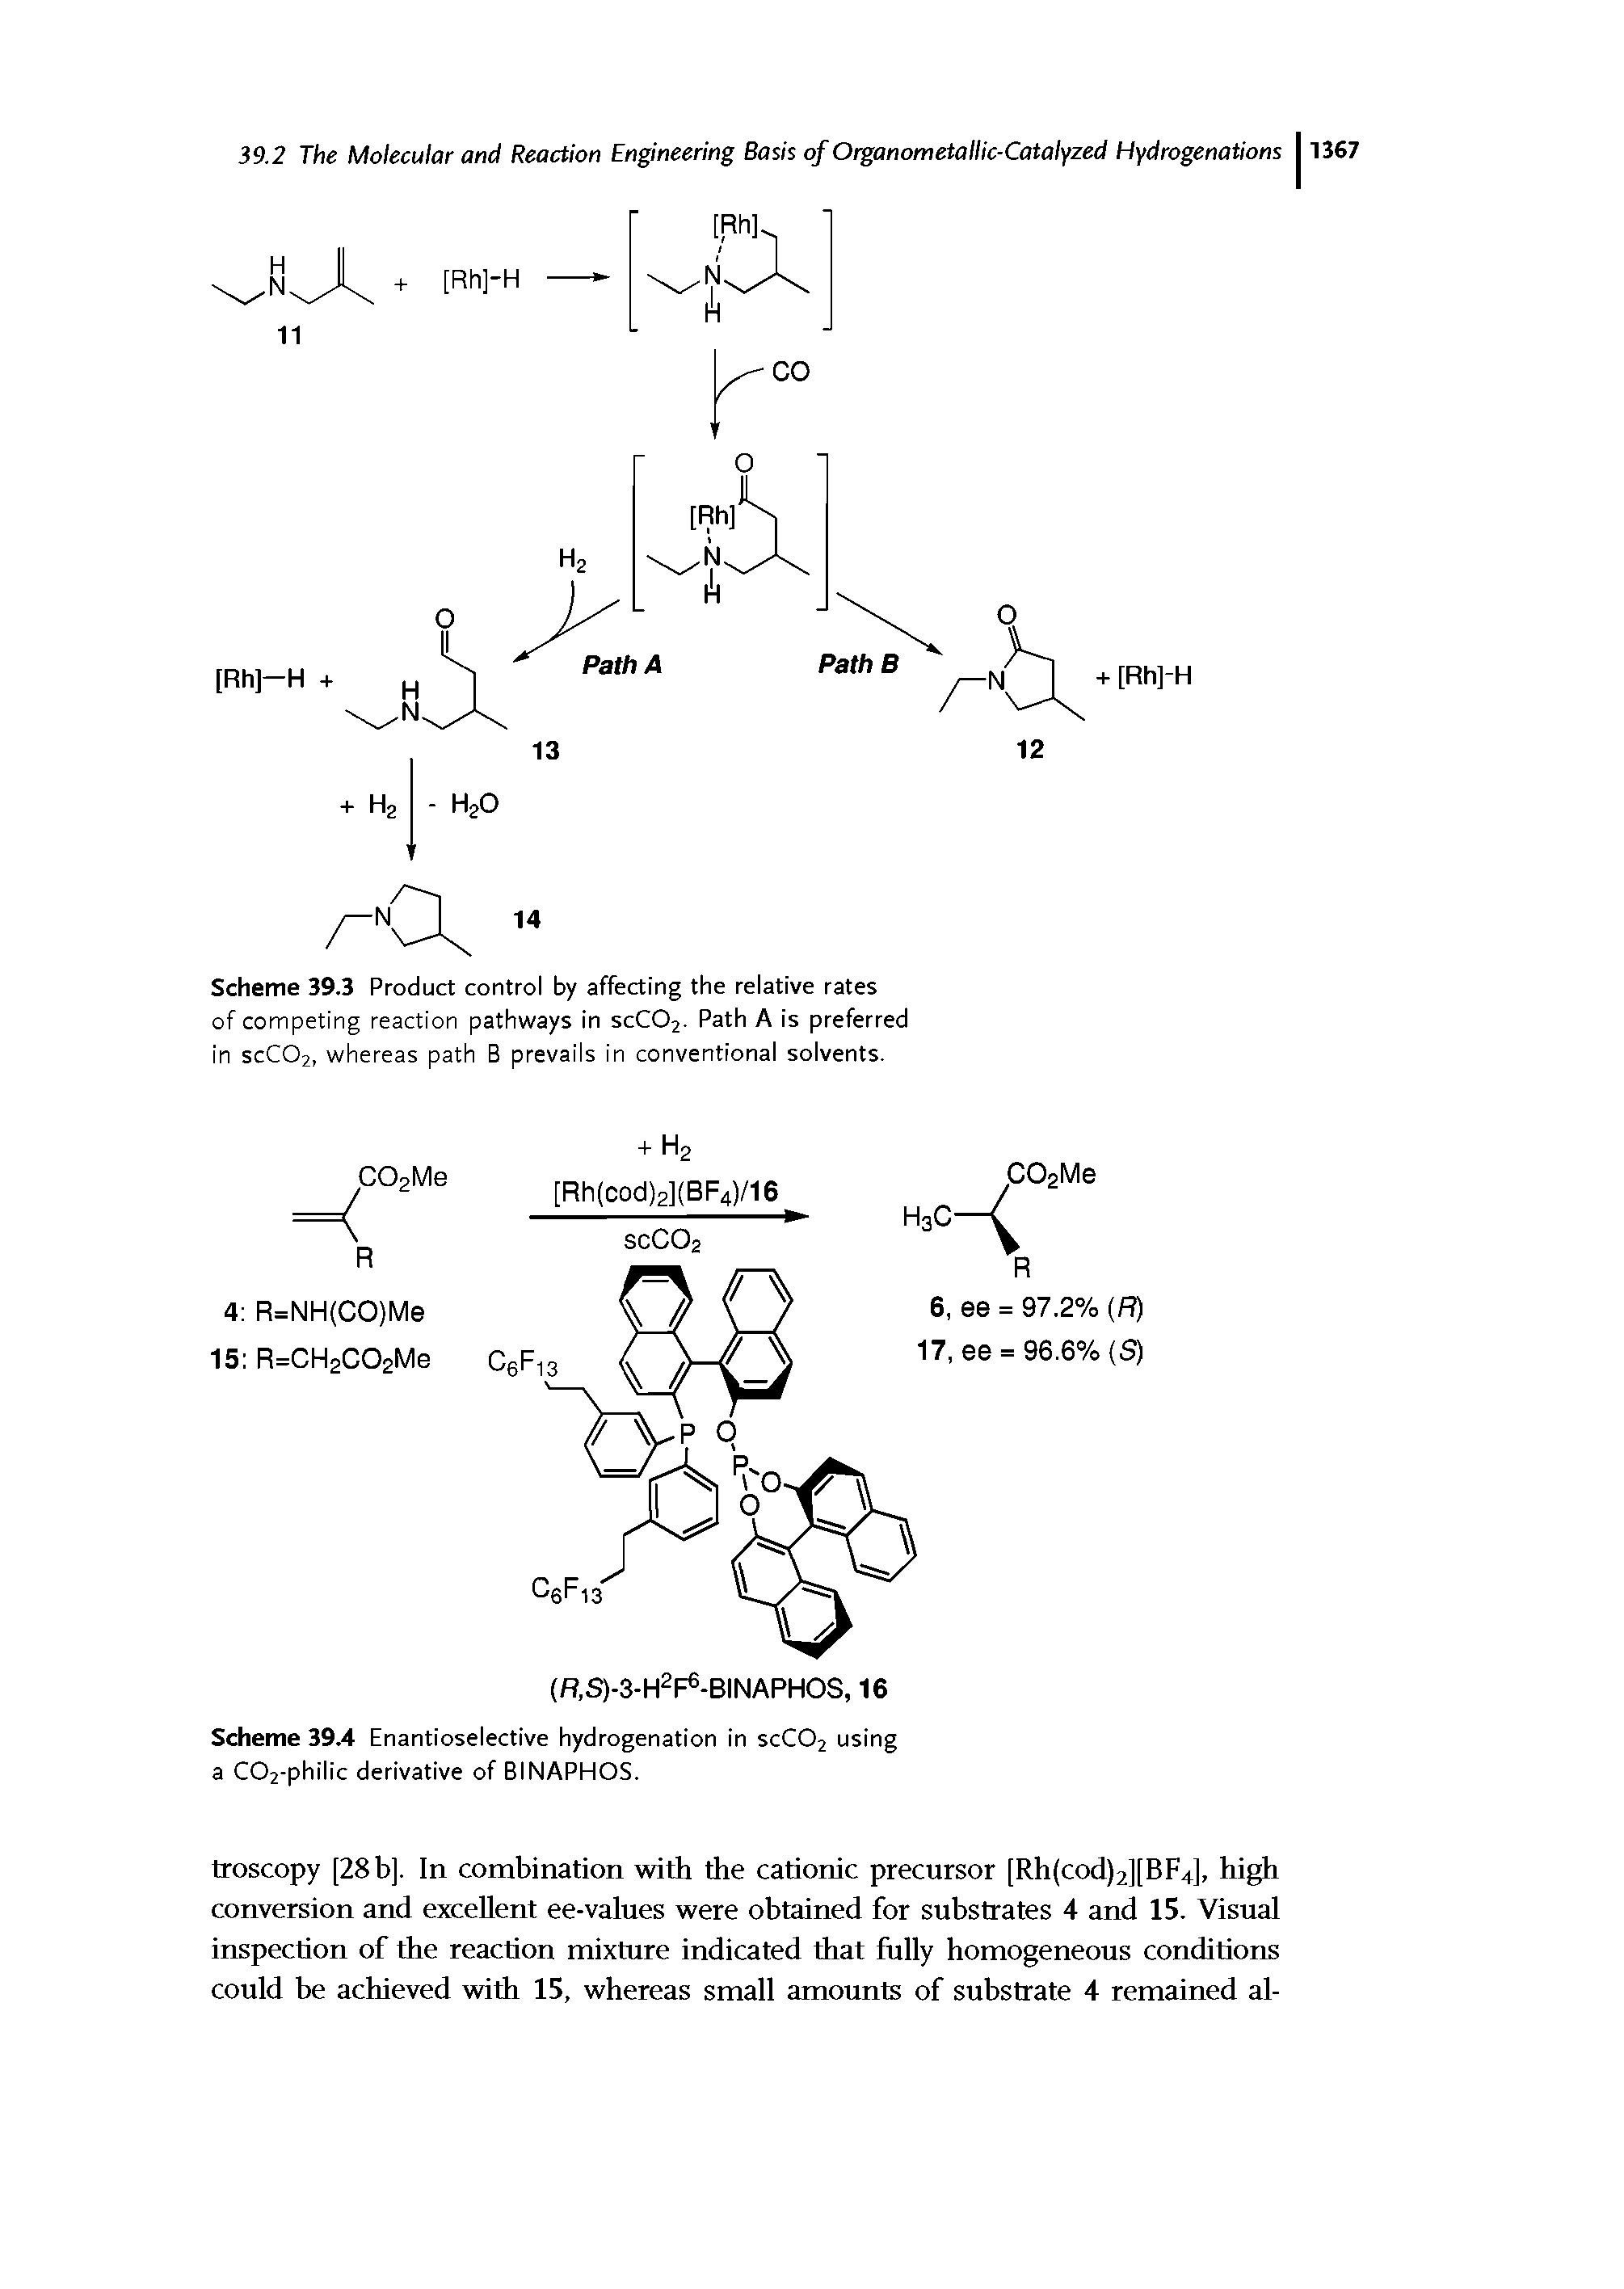 Scheme 39.3 Product control by affecting the relative rates of competing reaction pathways in scC02. Path A is preferred in scC02, whereas path B prevails in conventional solvents.